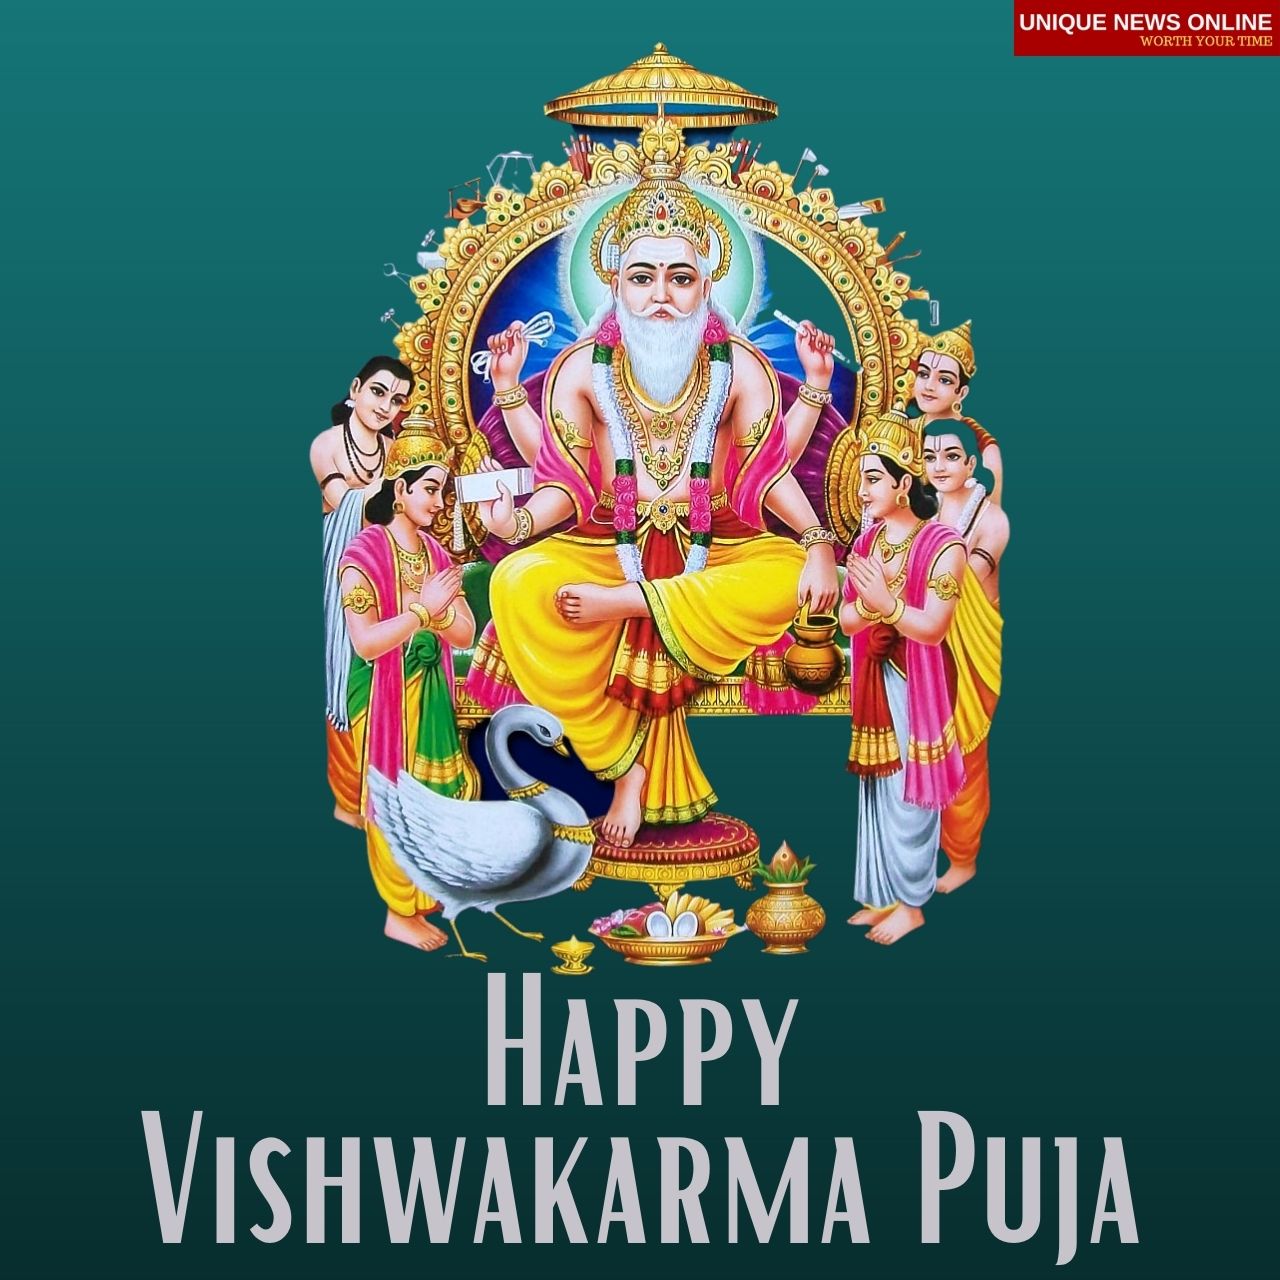 Happy Vishwakarma Puja 2021 Wishes, Quotes, HD Images, Messages, and Greetings to Share